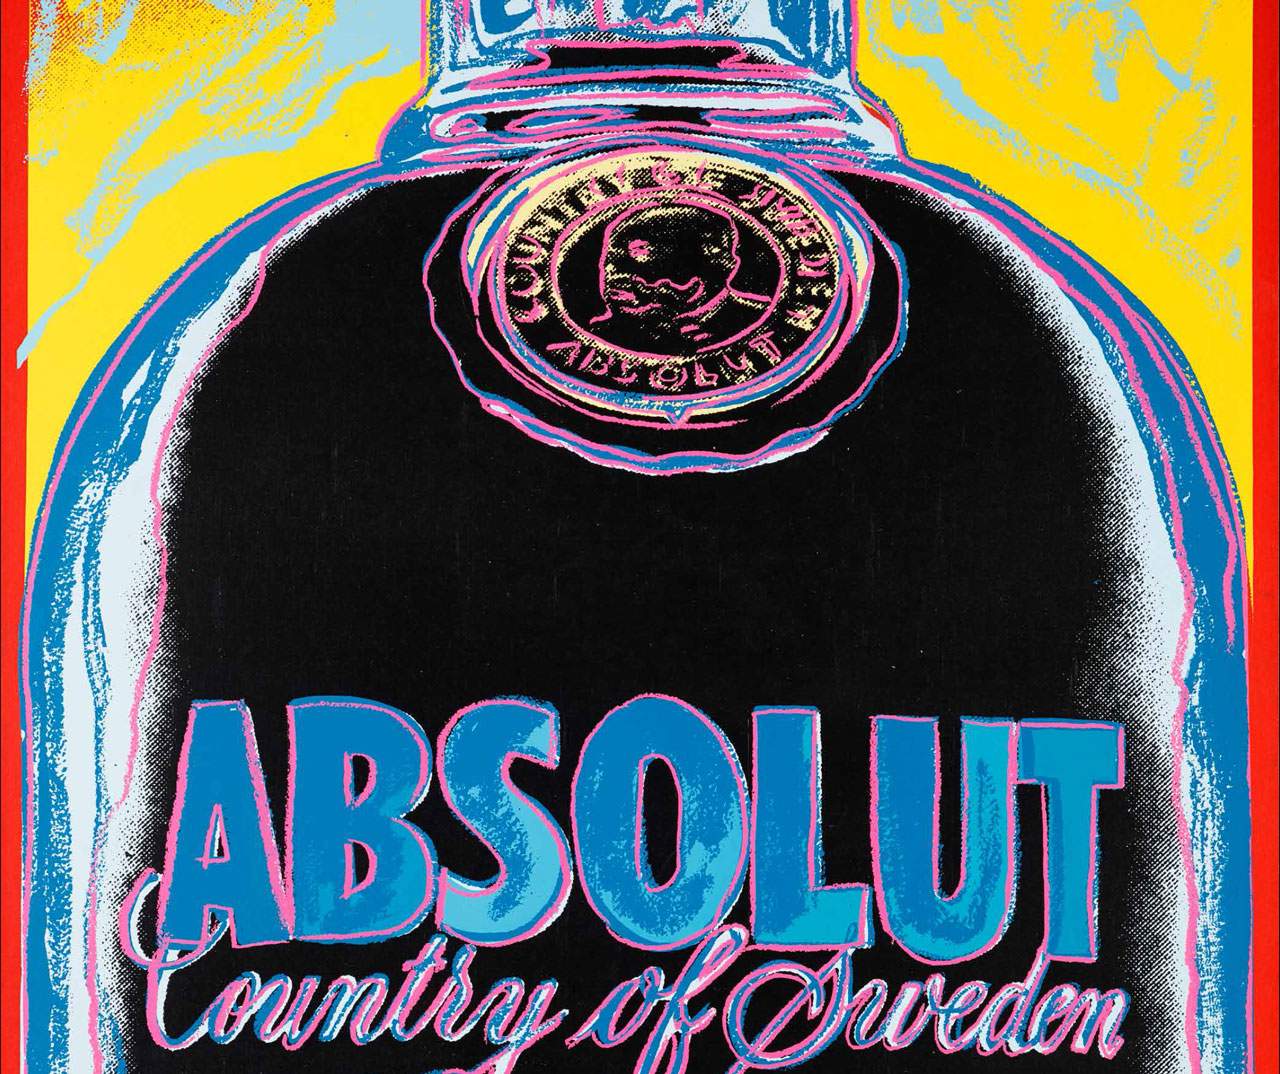 Win a Limited Edition Print of Andy Warhol’s Absolut Worth $400